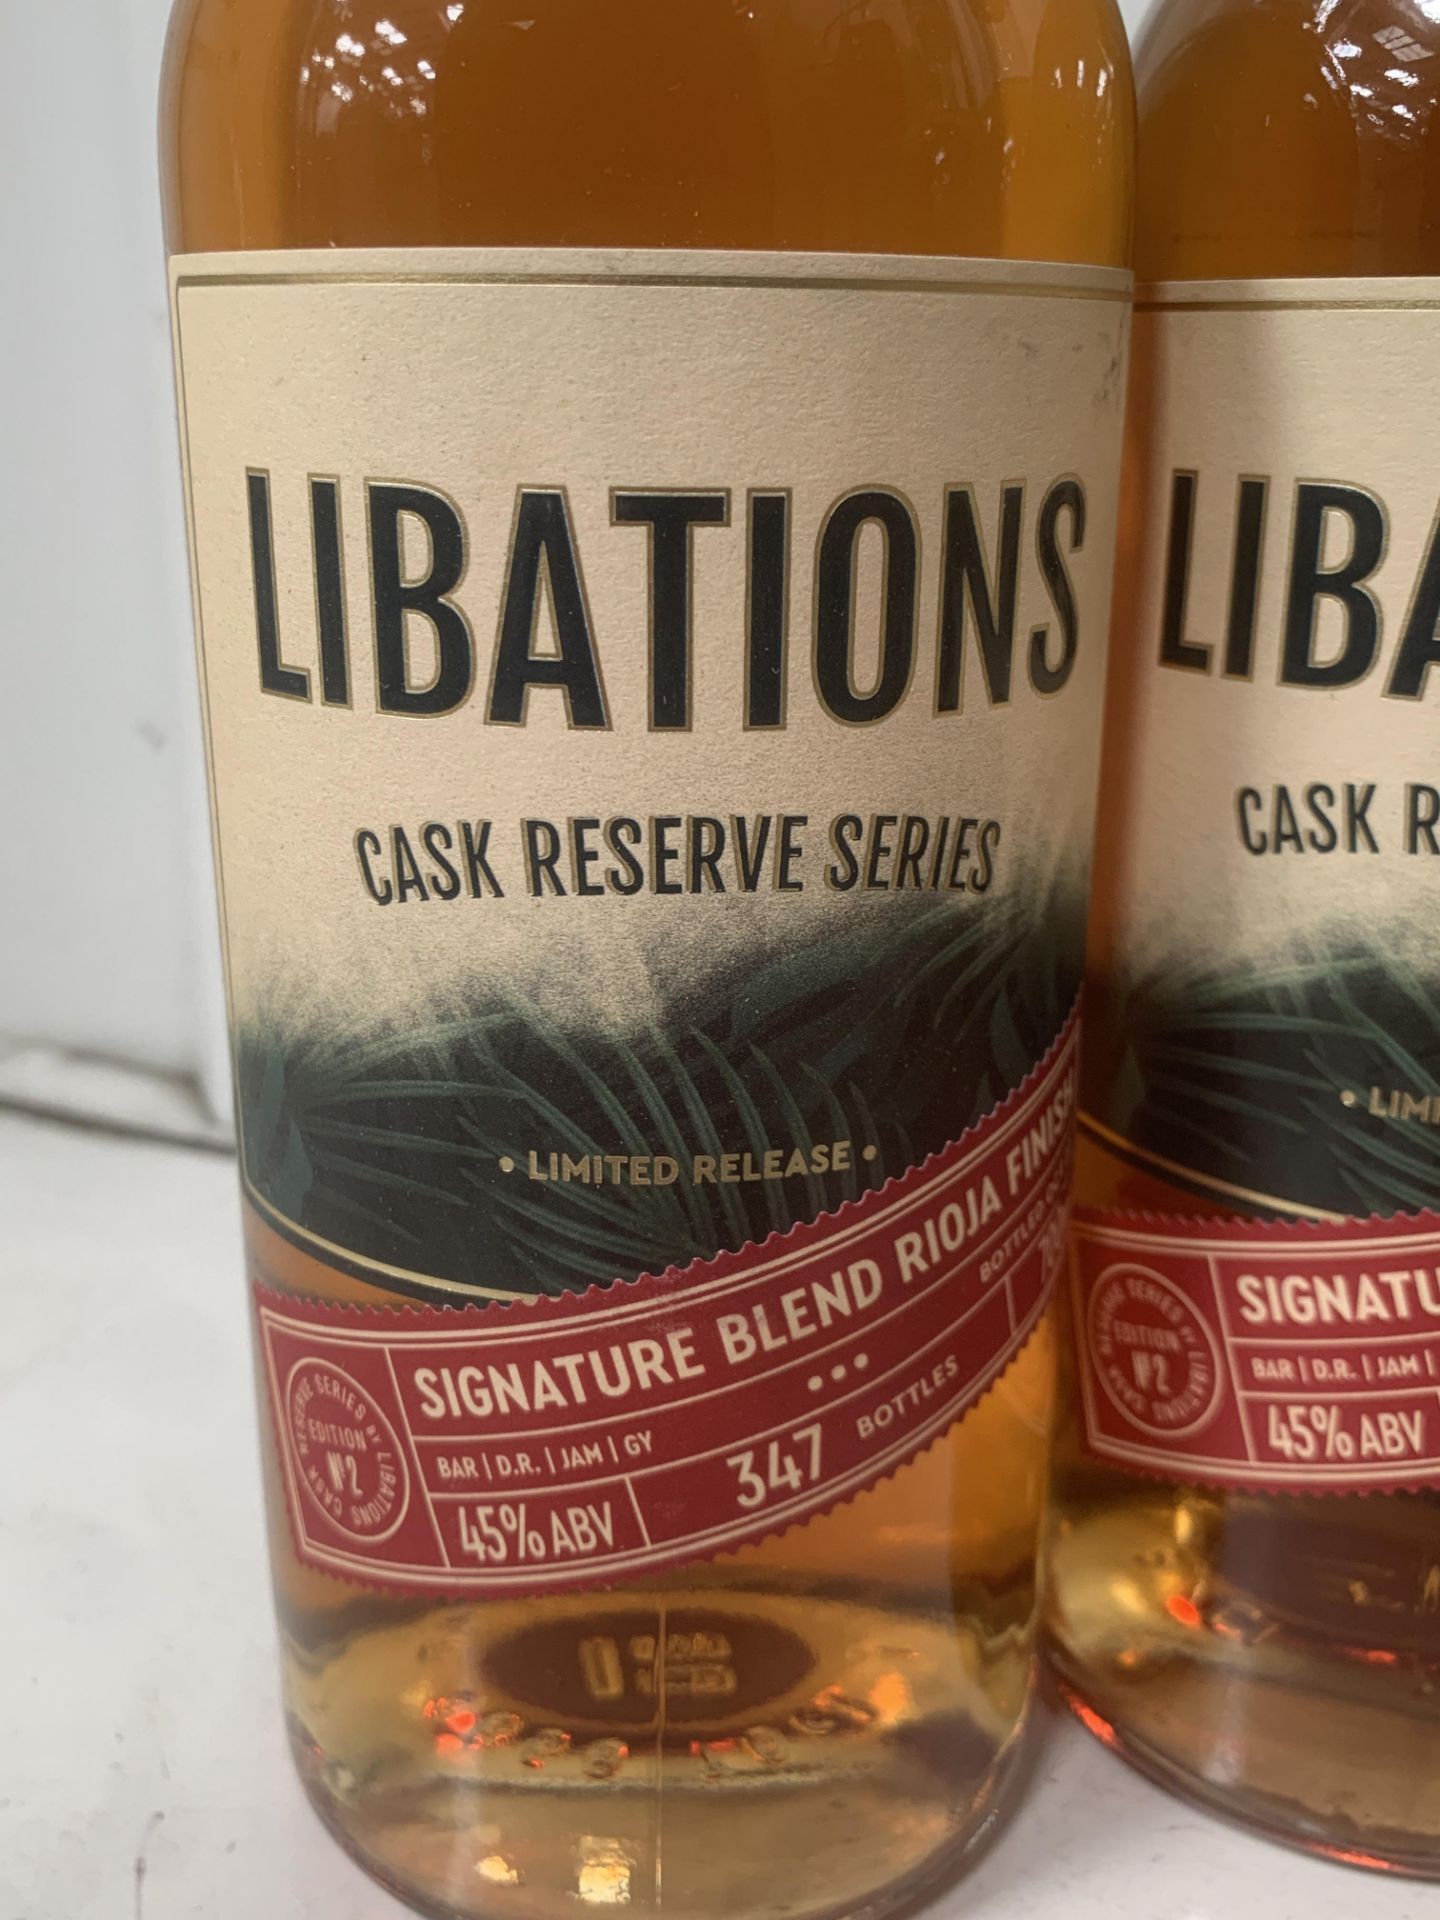 4x Bottles of Libations Cask Reserve Series Signature Blend Rioja Finish Rum 45%, 70cl - Image 2 of 3